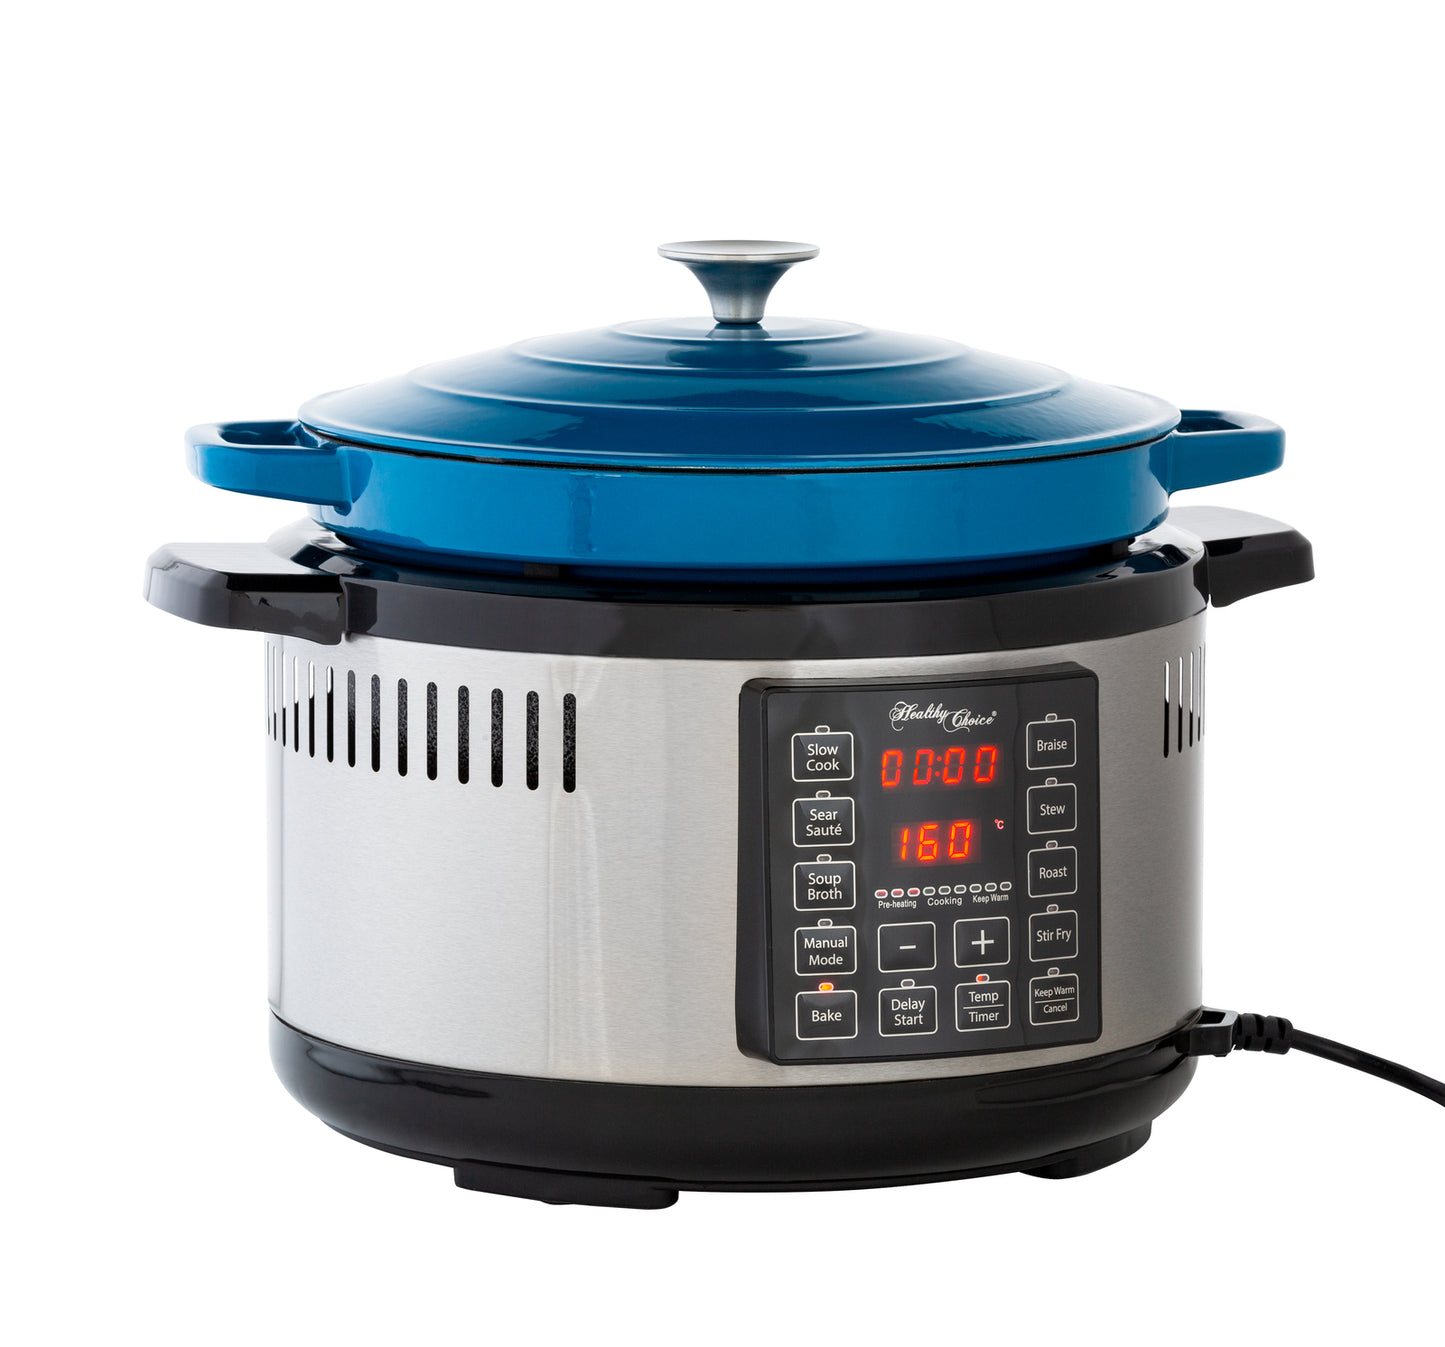 6.5L Smart Digital Dutch Oven w/ 8 Cook Settings, Stainless Steel